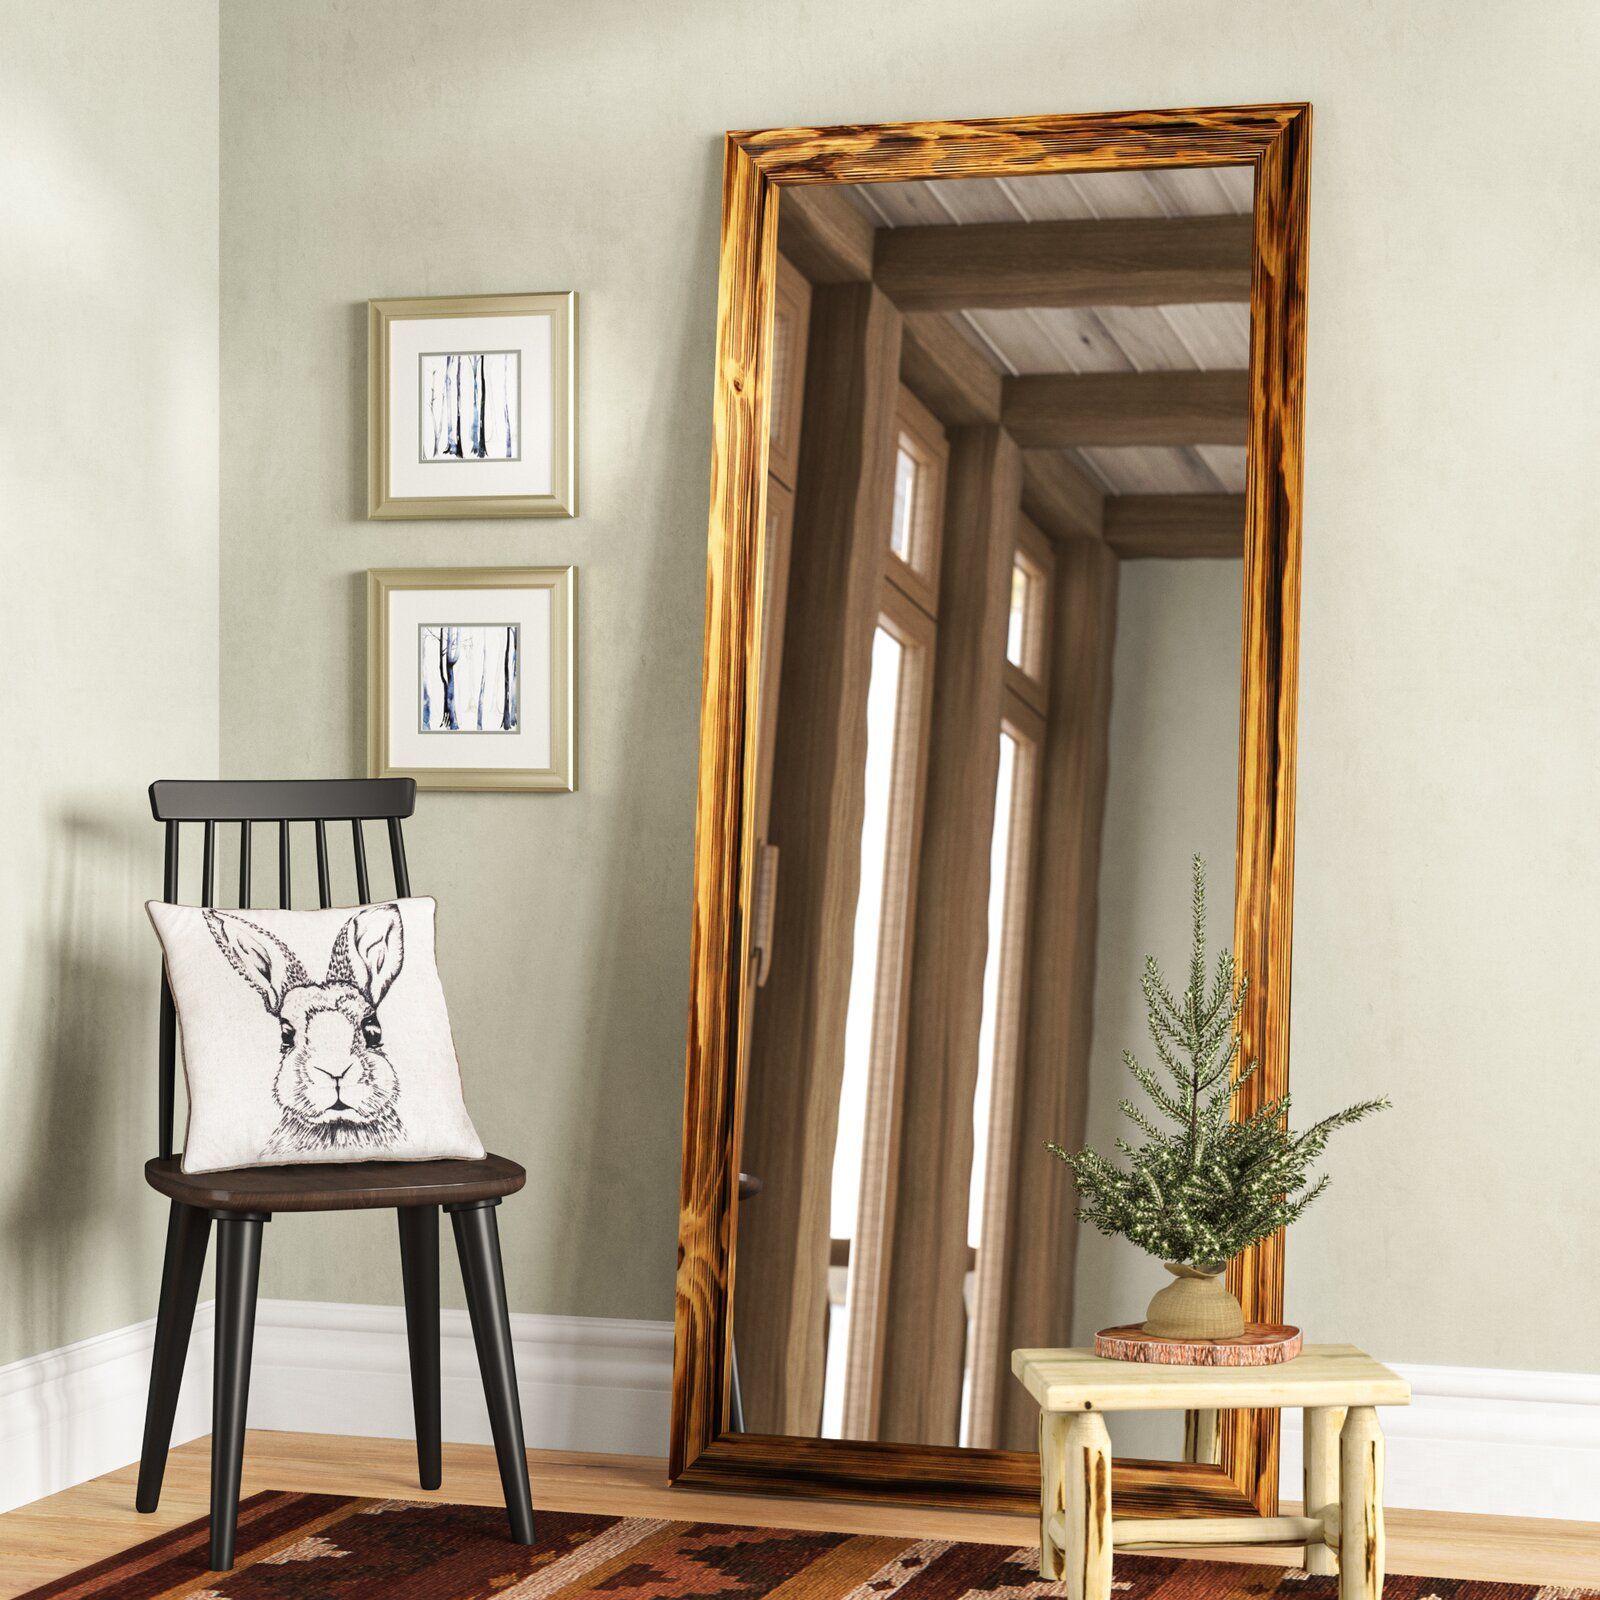 Cairo Platinum Gold Decorative Wall Mirror | Rustic Full Length Mirror For Mahogany Full Length Mirrors (View 5 of 15)